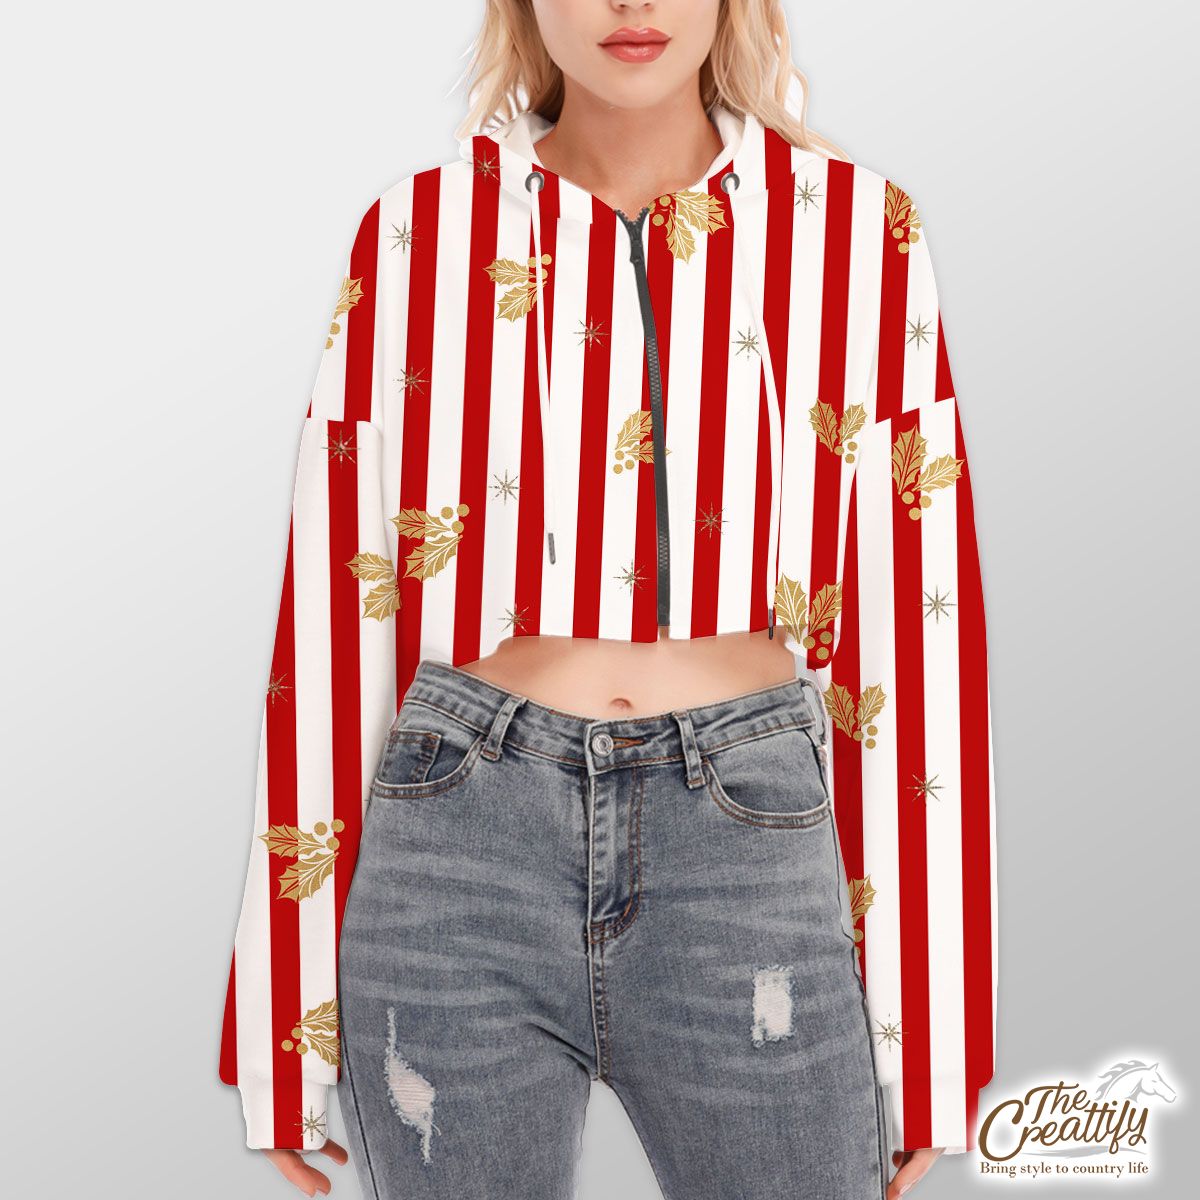 Holly Leaf On Red And White Stripe Hoodie With Zipper Closure